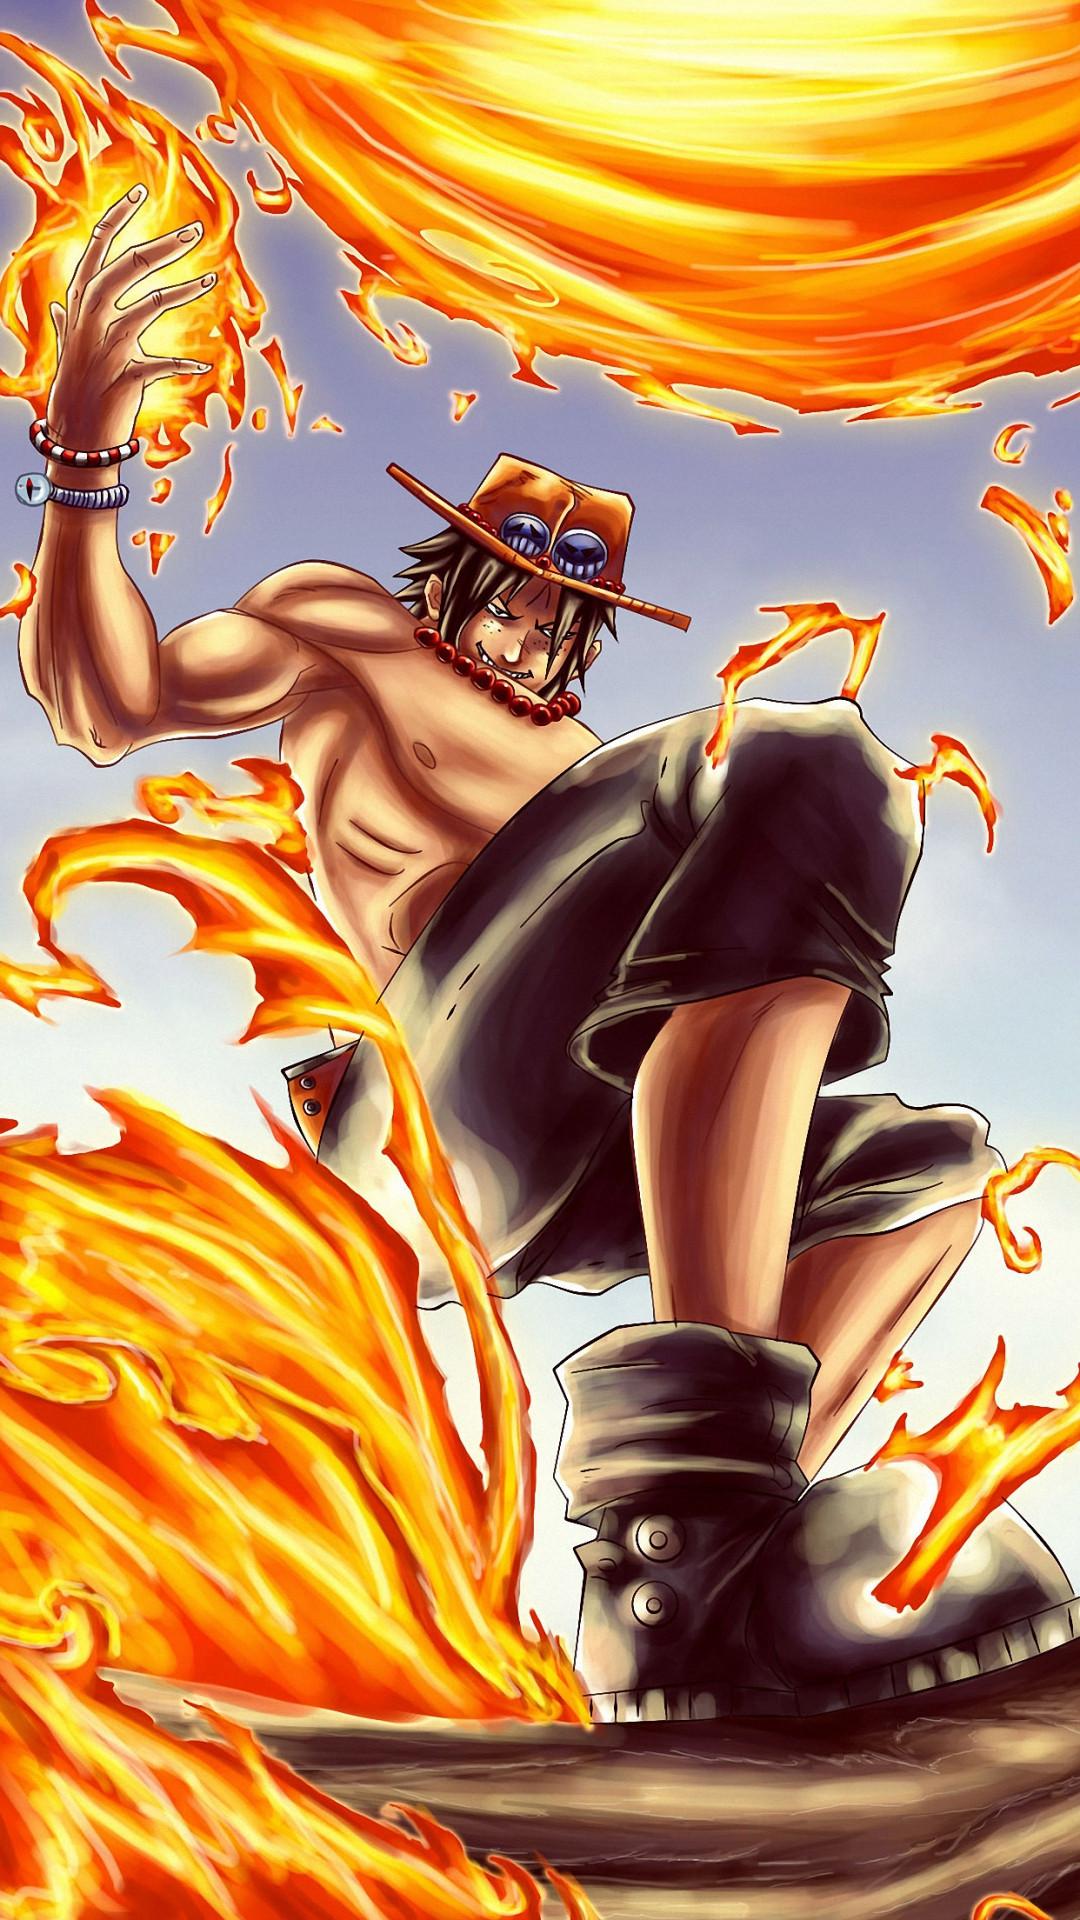 1080x1920 One Piece Wallpapers - Top Free 1080x1920 One Piece